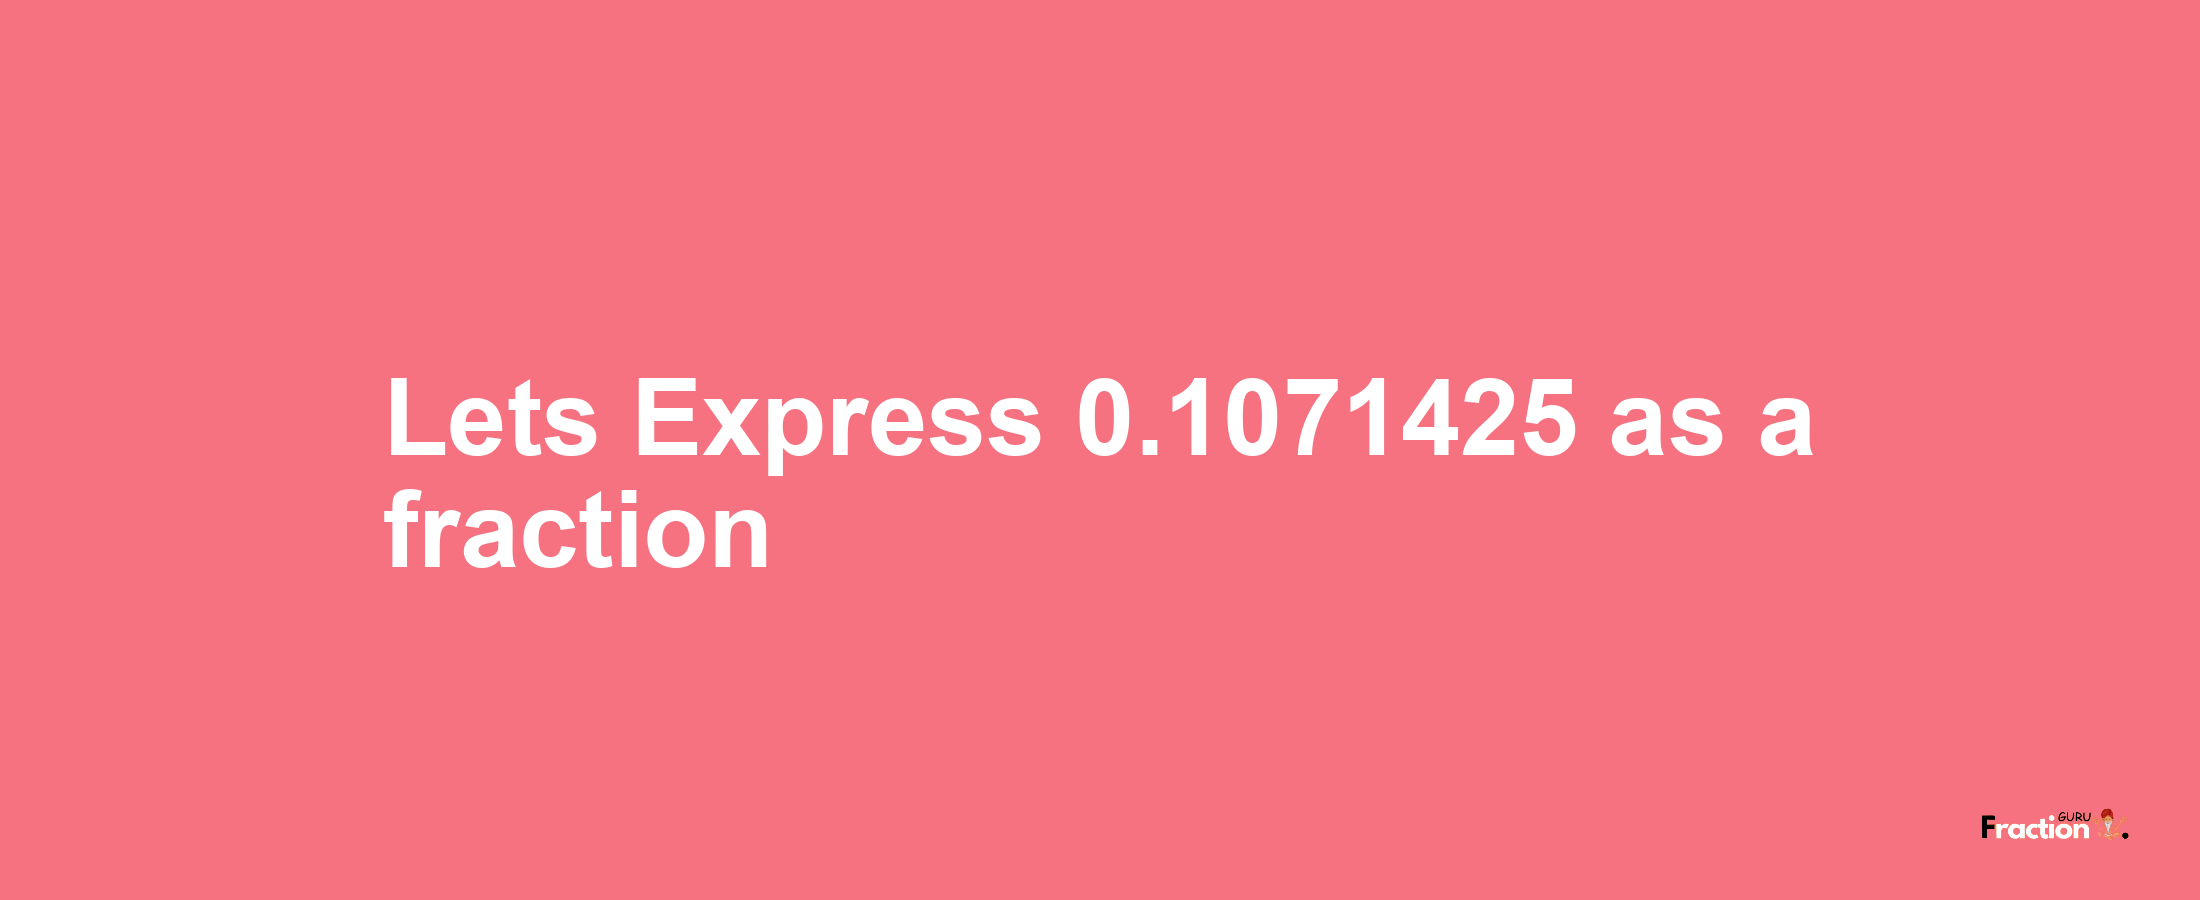 Lets Express 0.1071425 as afraction